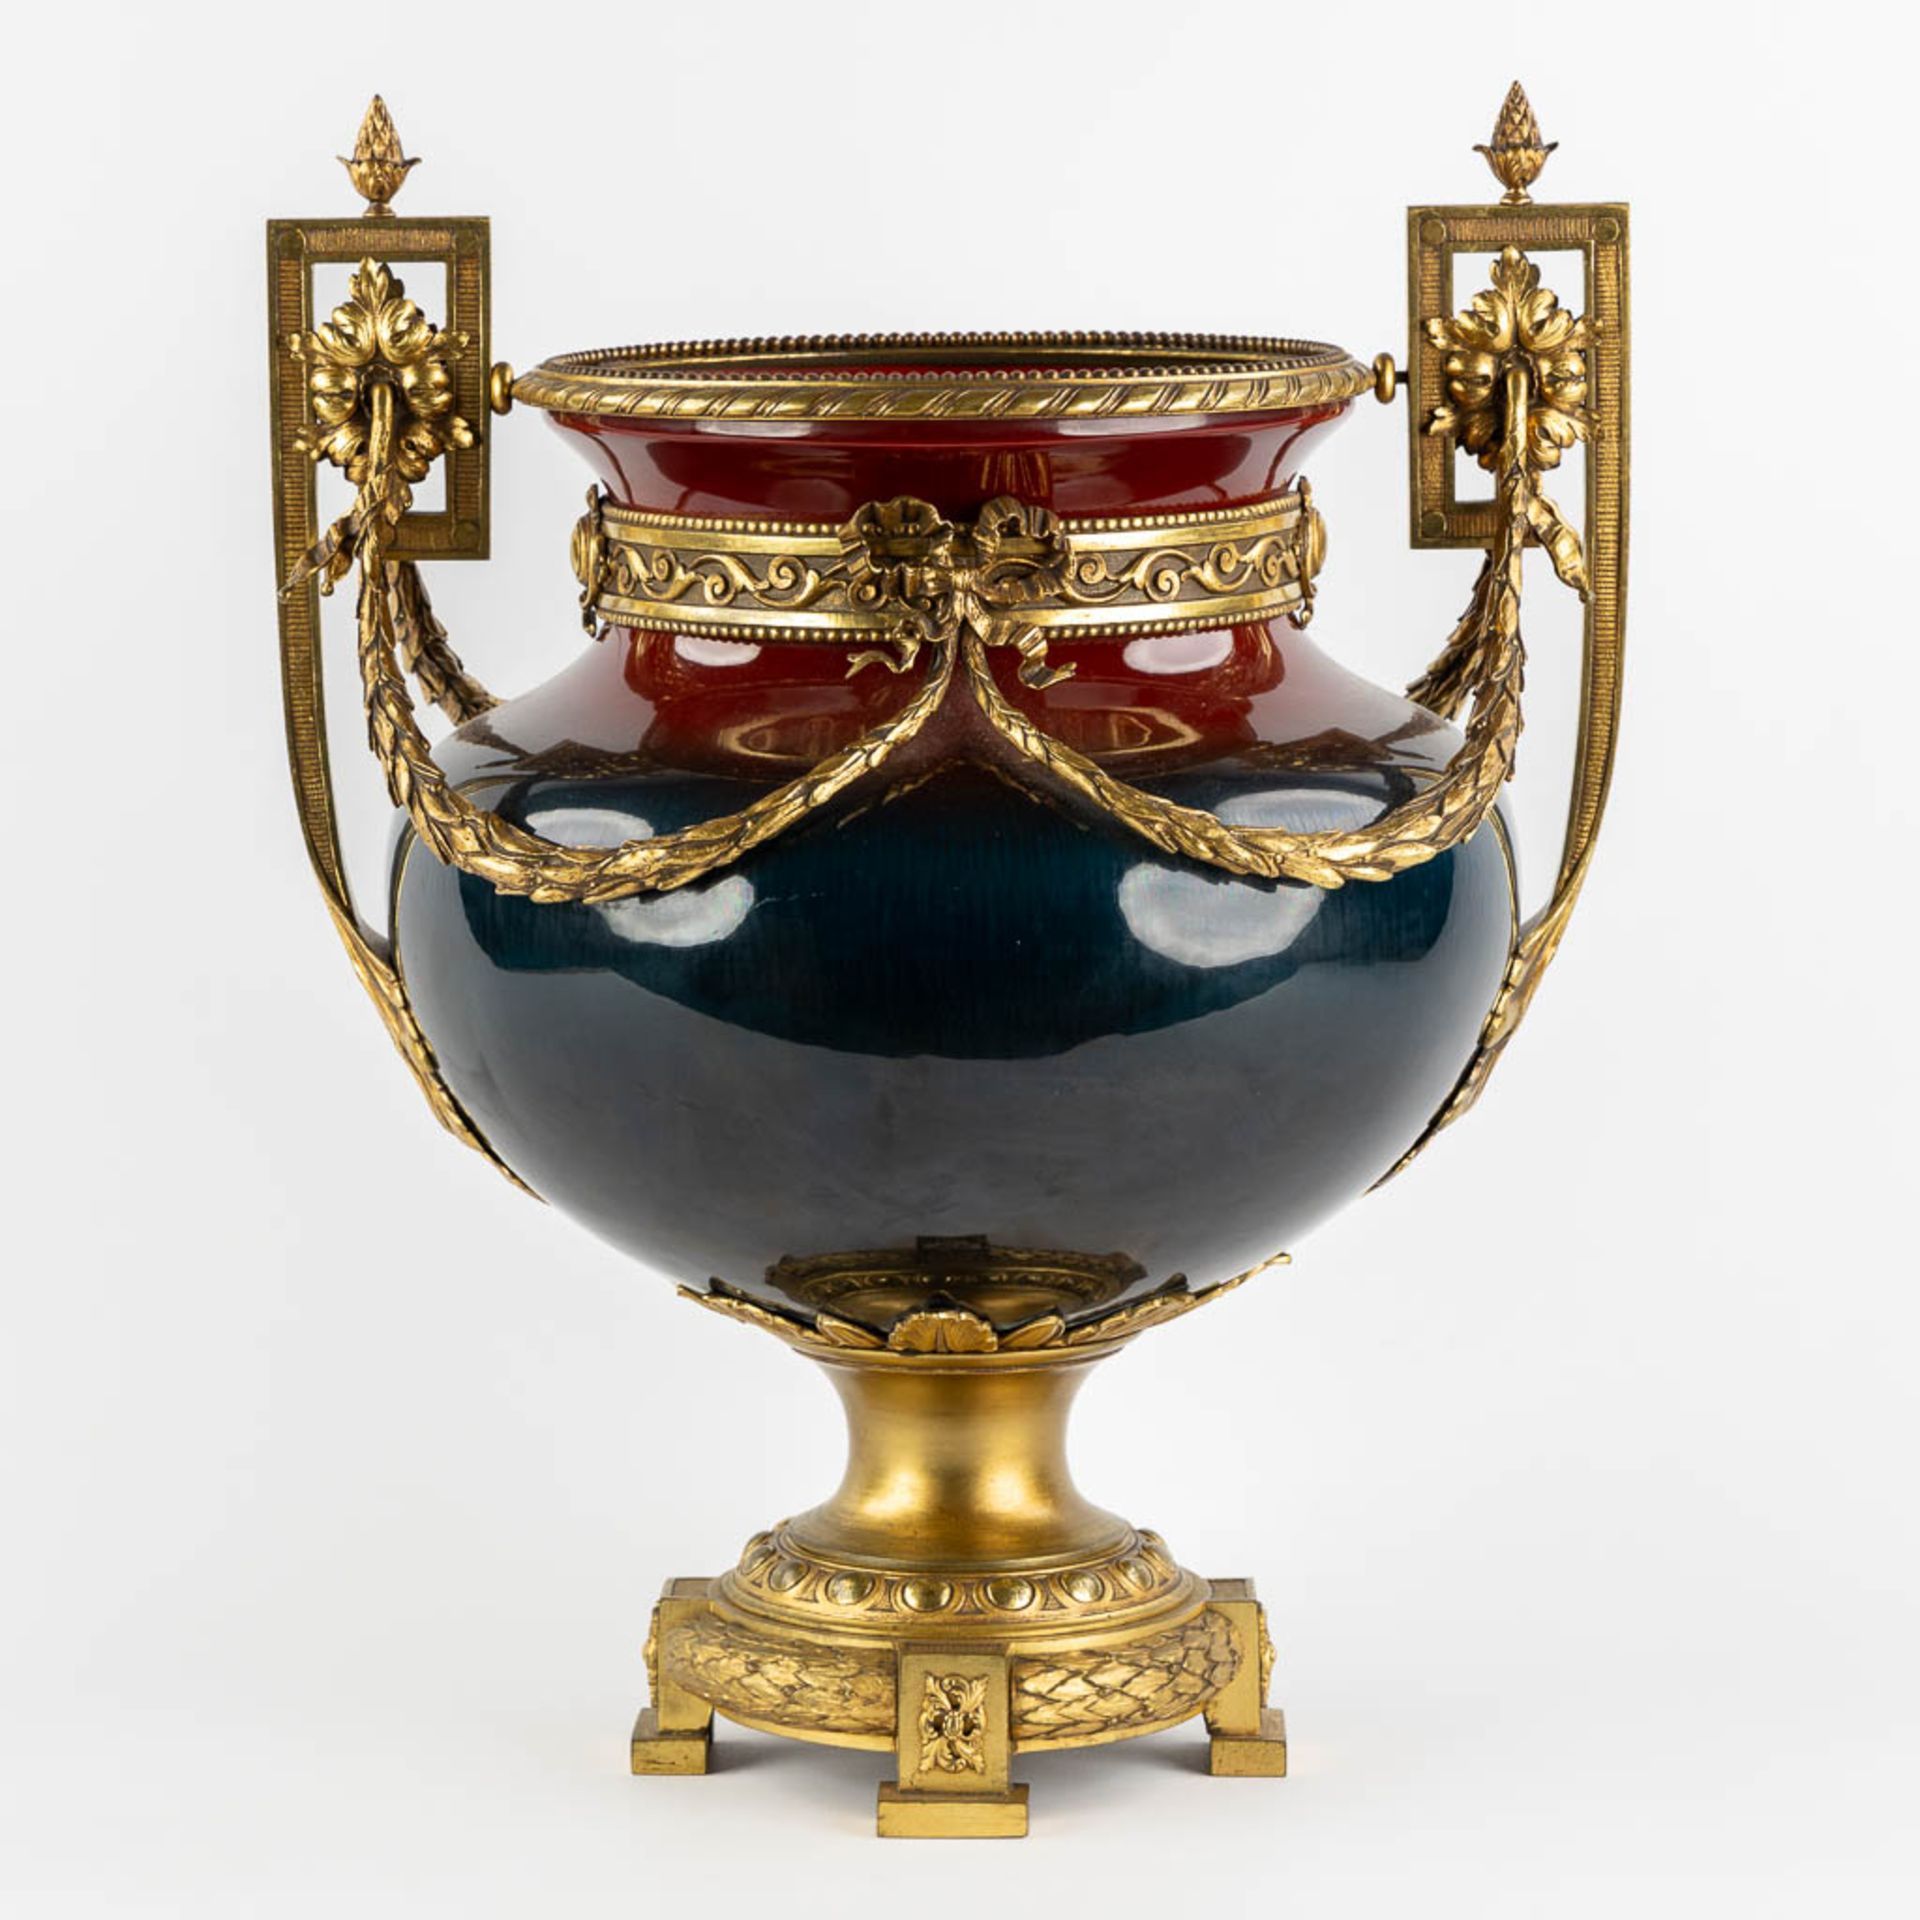 A large faience vase mounted with gilt bronze in Louis XV style. Circa 1900. (L:34 x W:40 x H:50 cm) - Bild 5 aus 12